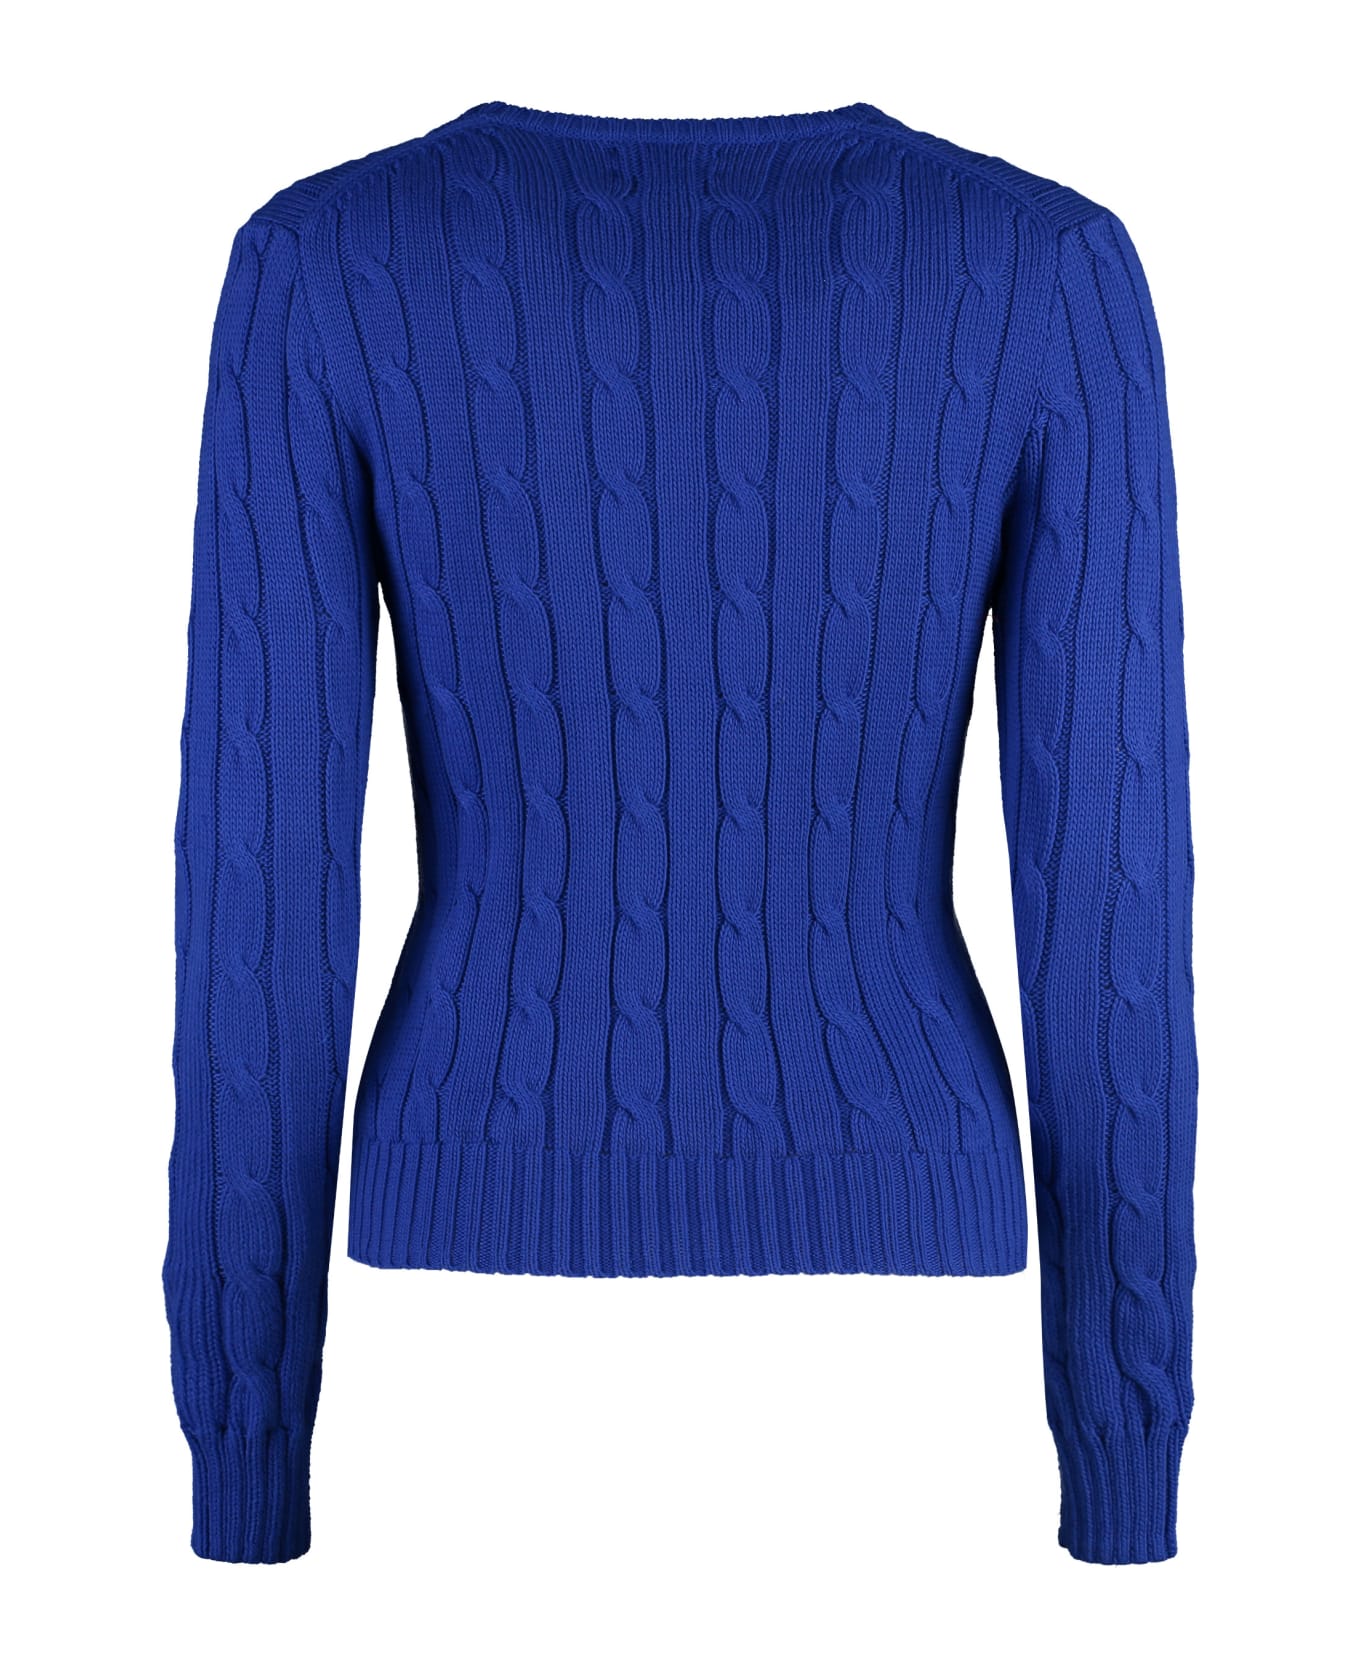 Polo Ralph Lauren Cable Knit Sweater - Blue フリース